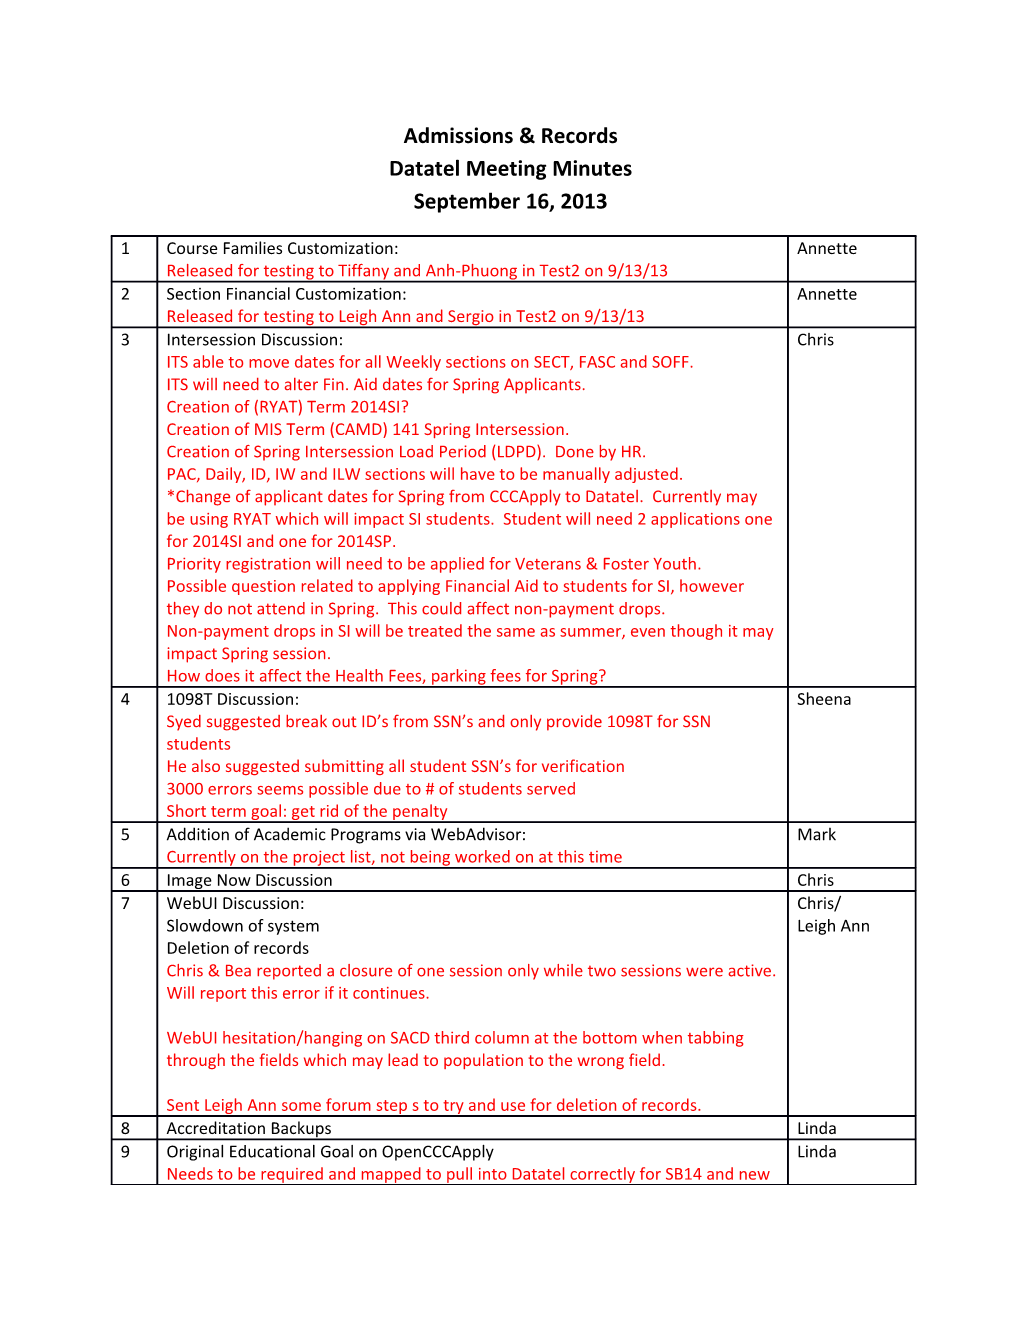 Admissions & Records Datatel Meeting Minutes September 16, 2013